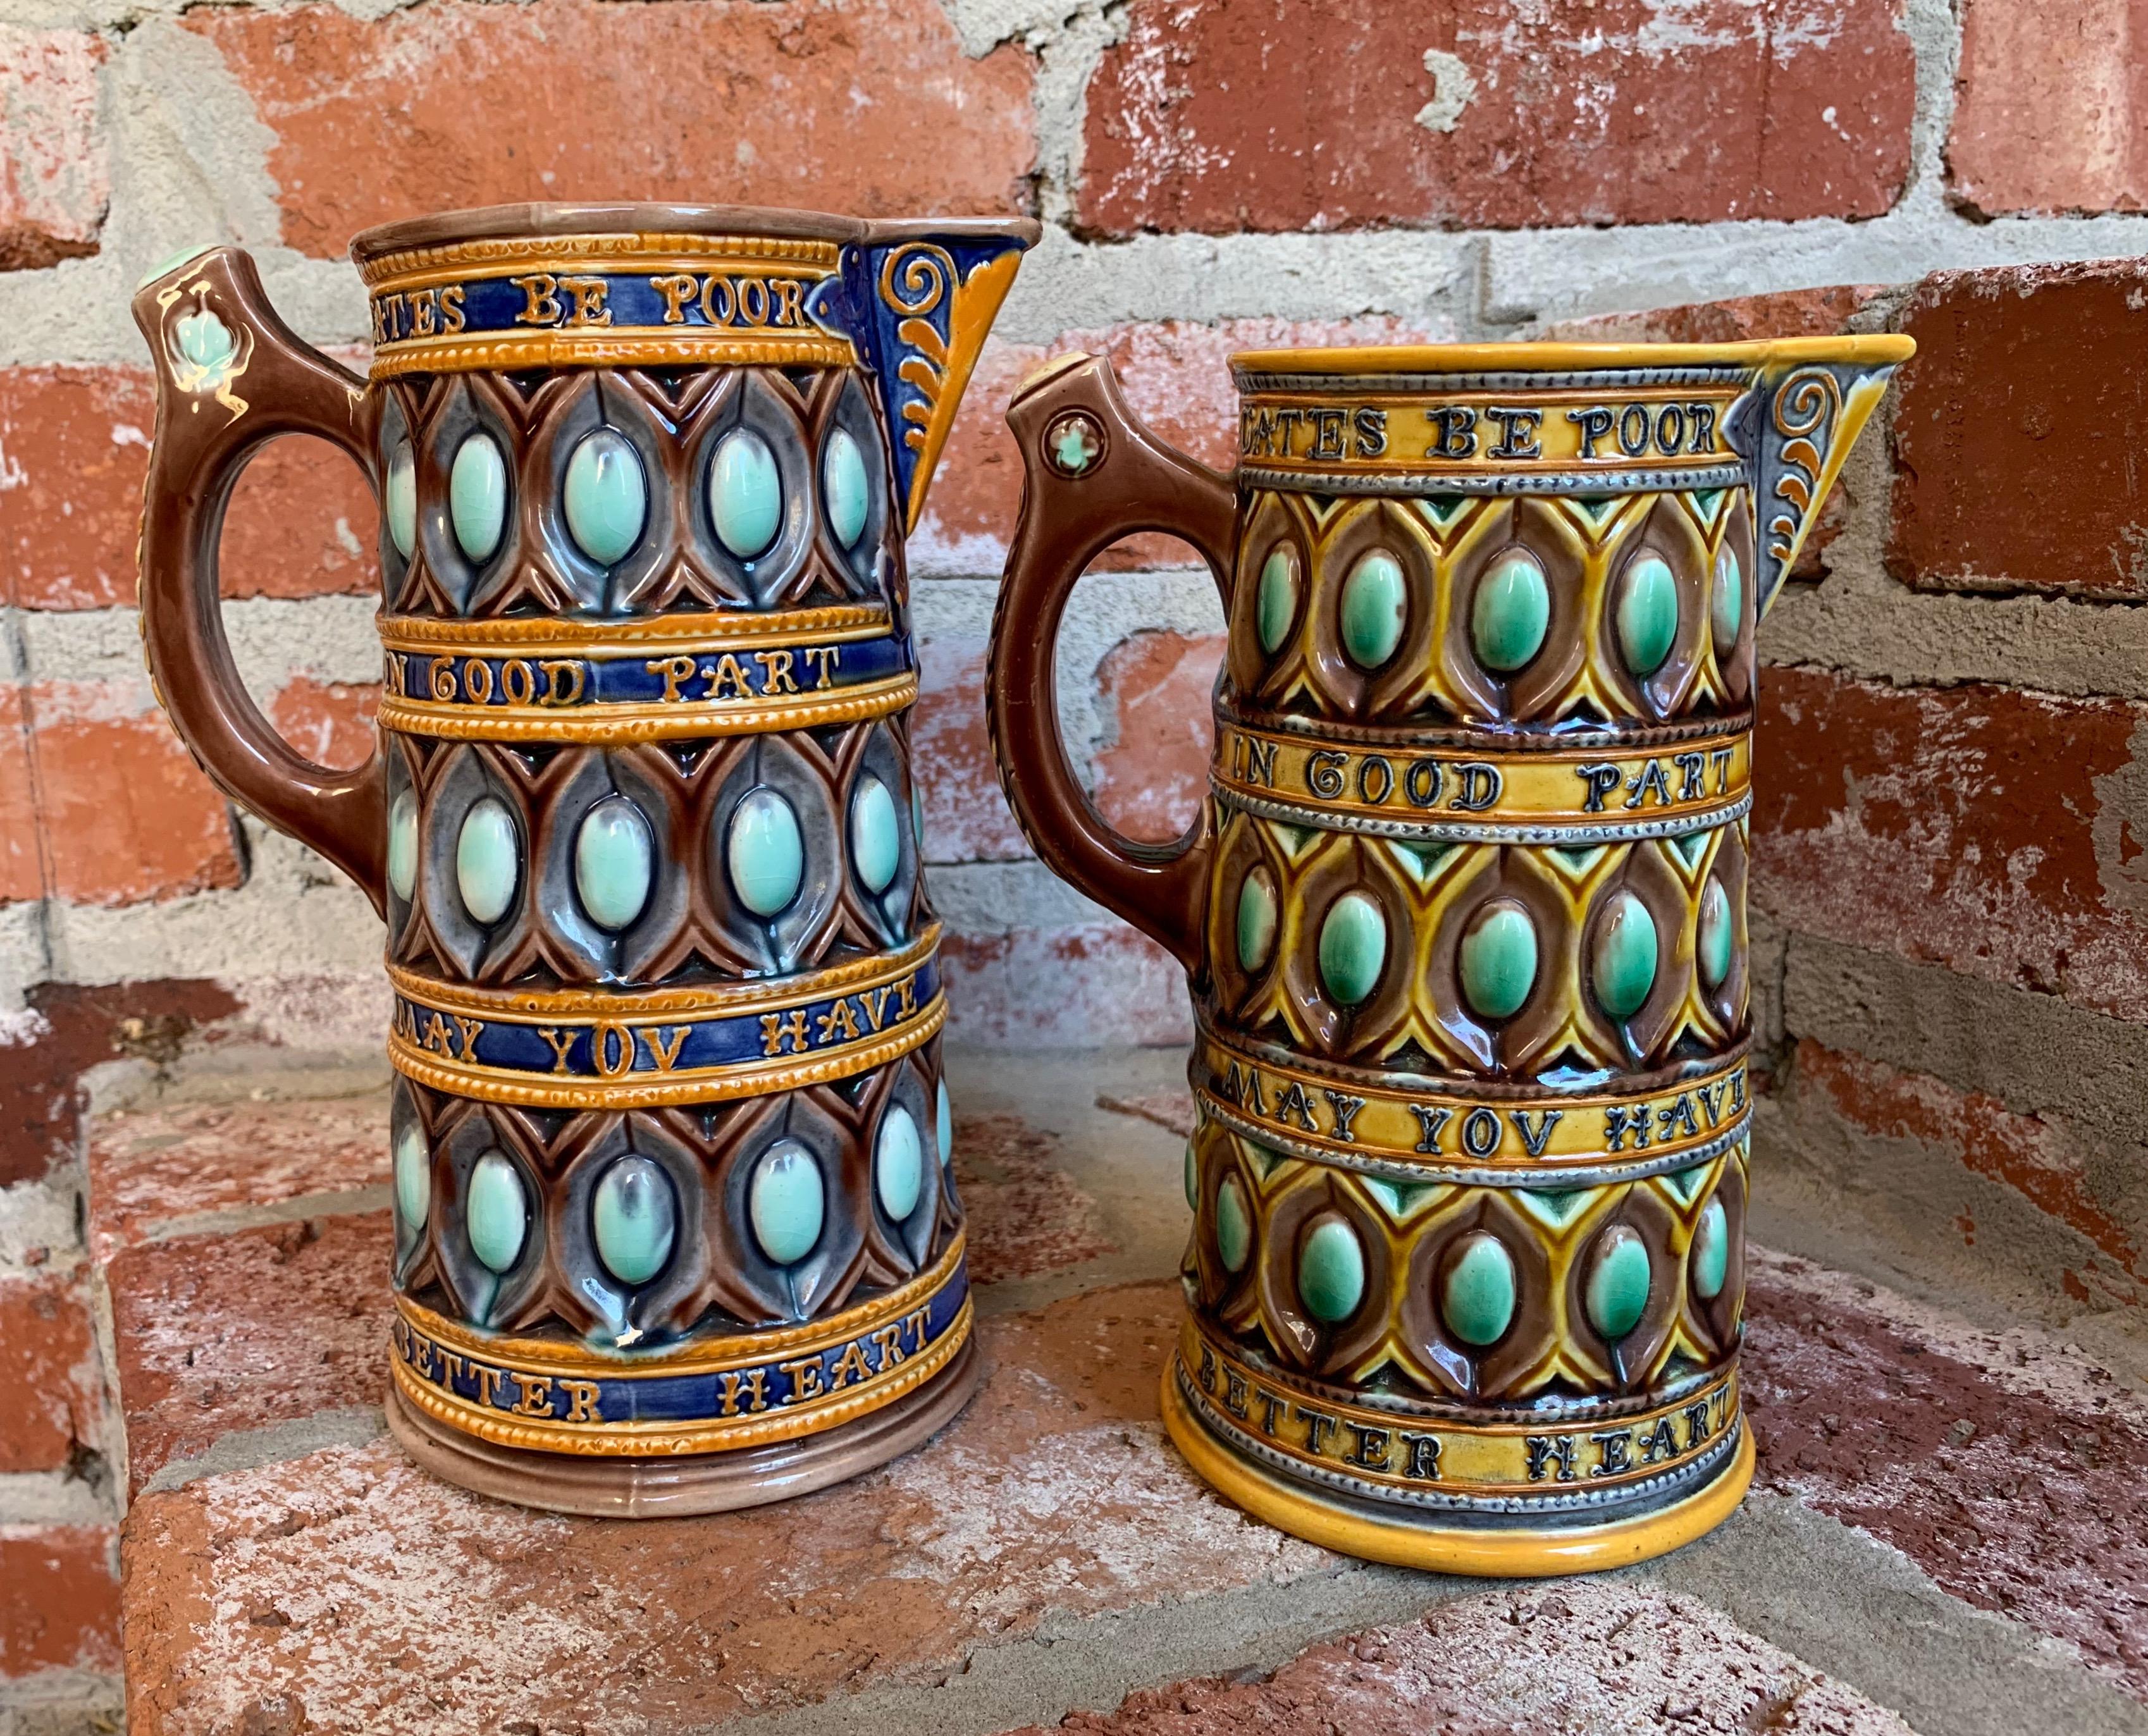 ~Direct from England~
~Amazing that here we have two of these unique and rare Wedgwood pitchers or “caterer jugs” for sale!~ 
~The body of the jugs are heavily relief moulded with bands of repeat design set between moulded belts of written